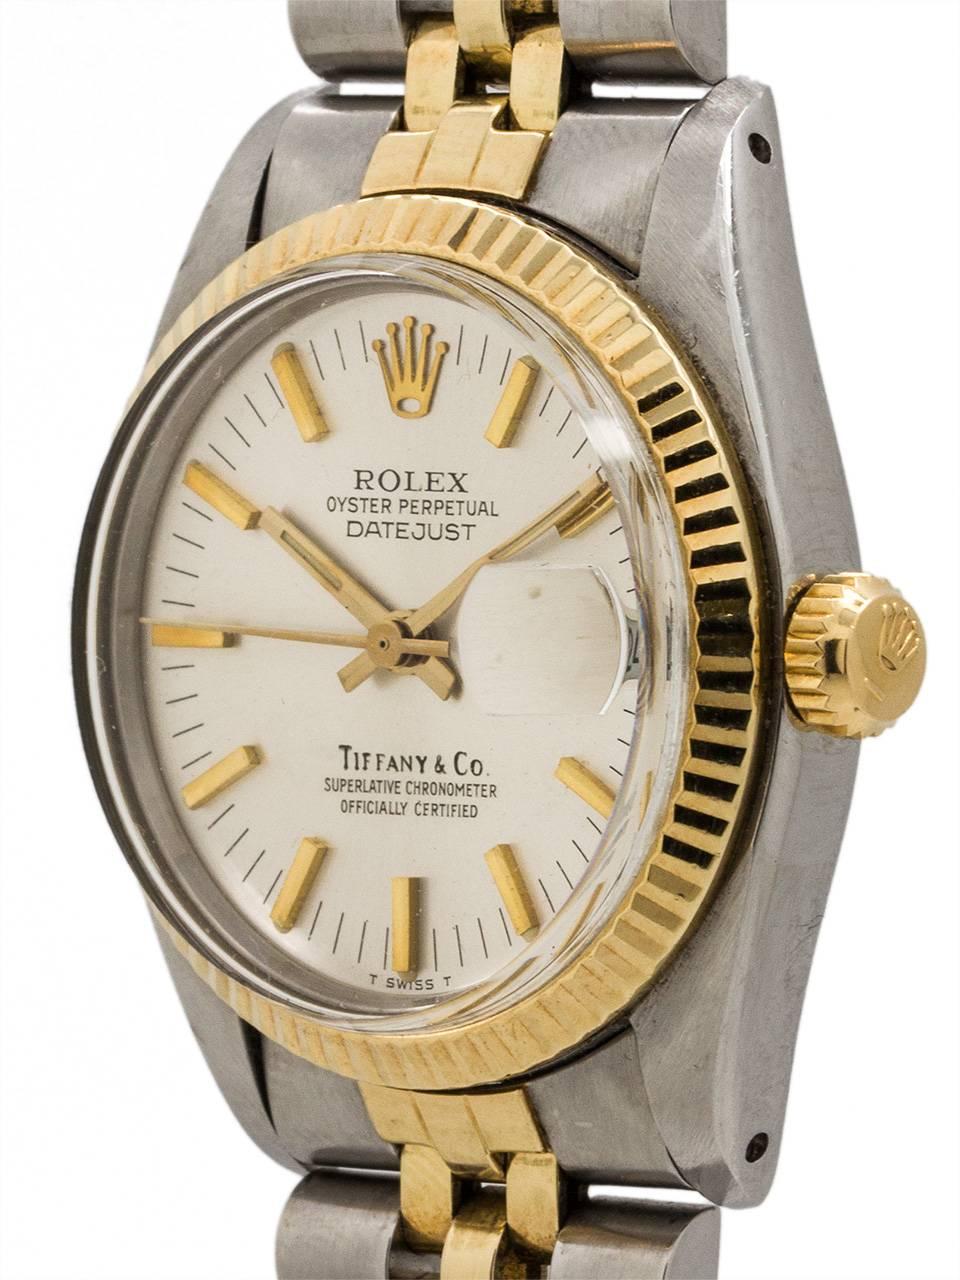 Scarce and very desirable Rolex midsize Datejust ref 6827 SS/18K YG circa 1979 retailed by Tiffany & Co. Featuring 31mm diameter case with fluted bezel, acrylic crystal and original silvered satin dial signed by retailer Tiffany & Co.